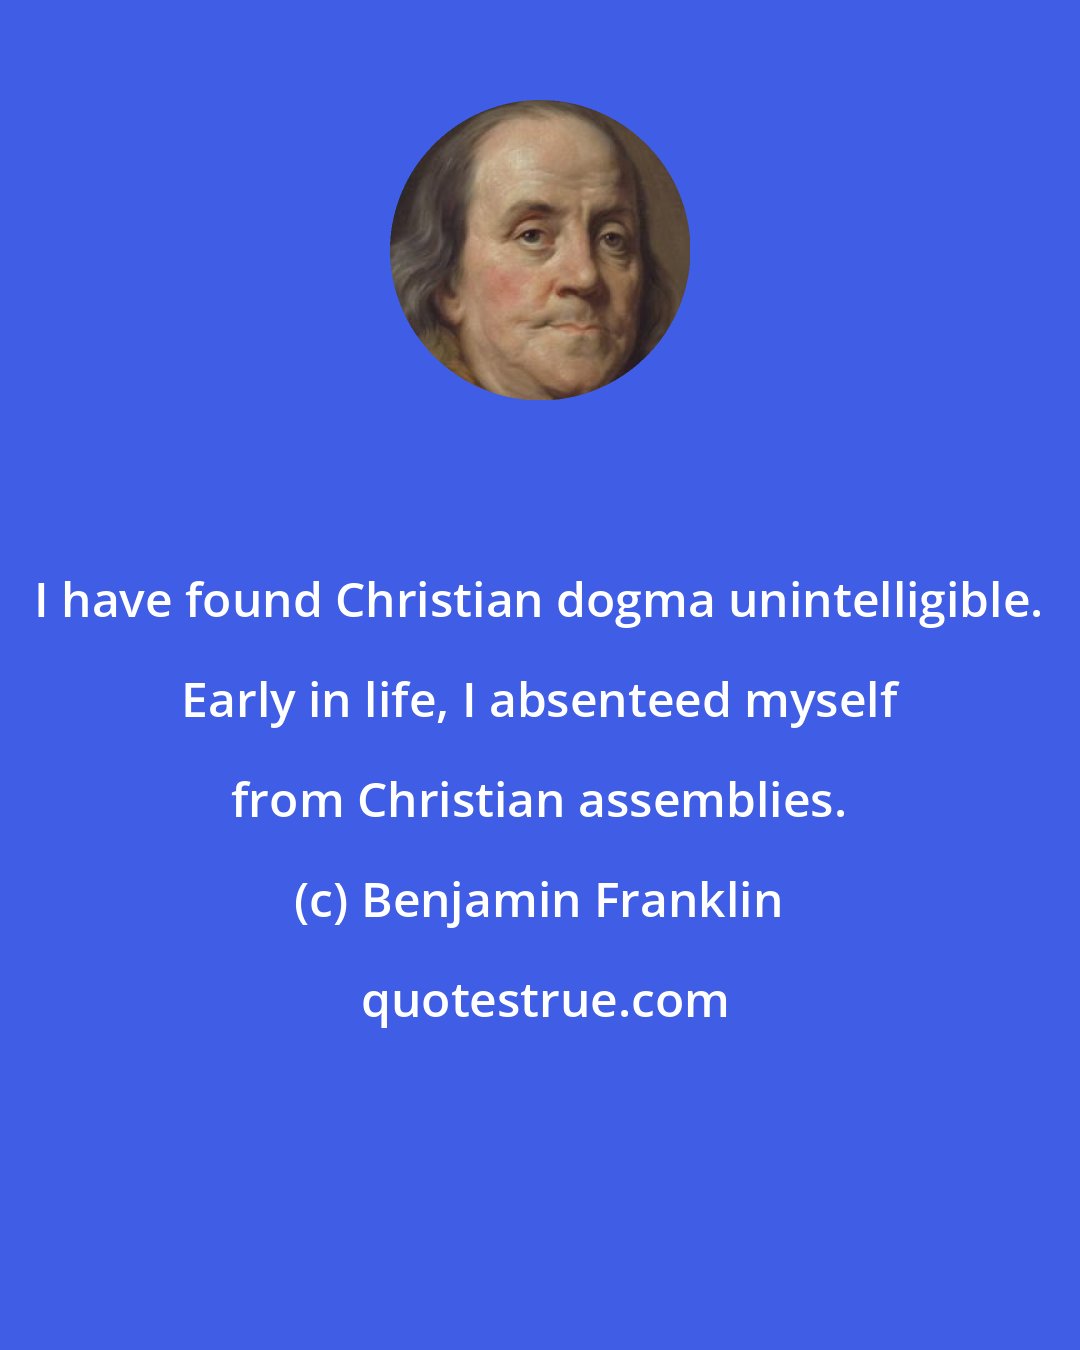 Benjamin Franklin: I have found Christian dogma unintelligible. Early in life, I absenteed myself from Christian assemblies.